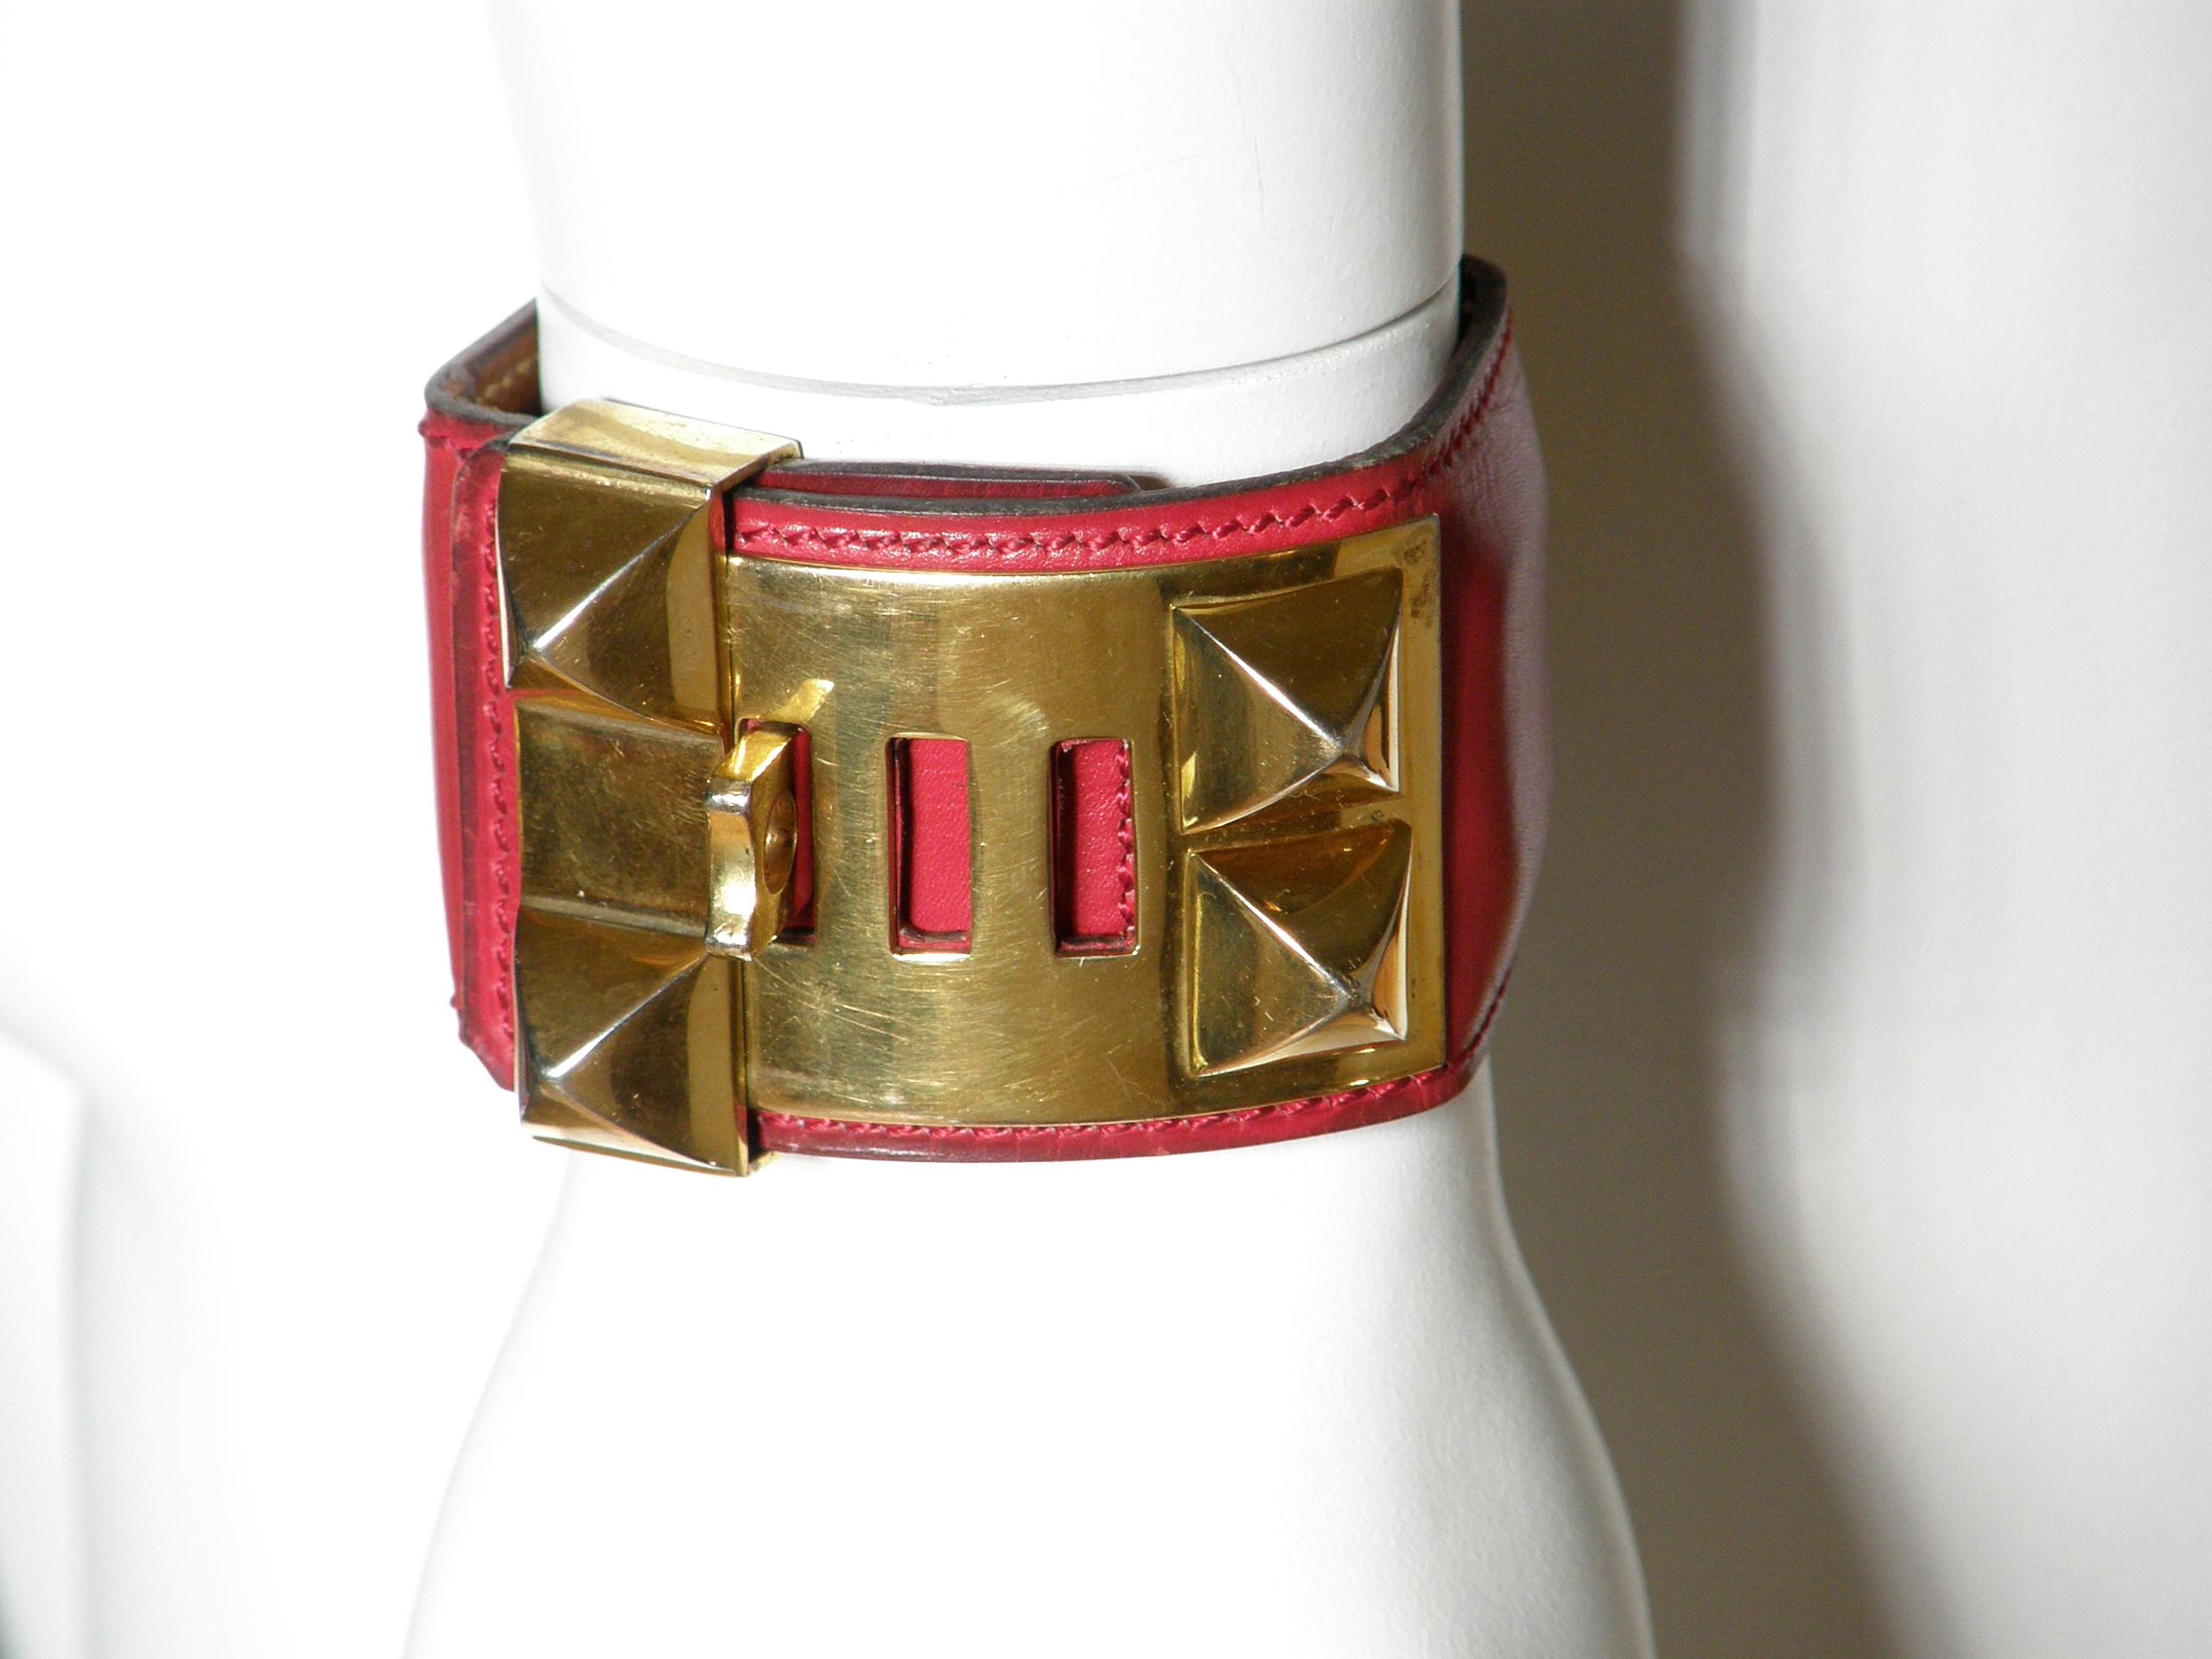 Early Hermès Collier de Chien Cuff Bracelet Red Leather CDC with Gold Hardware For Sale 2